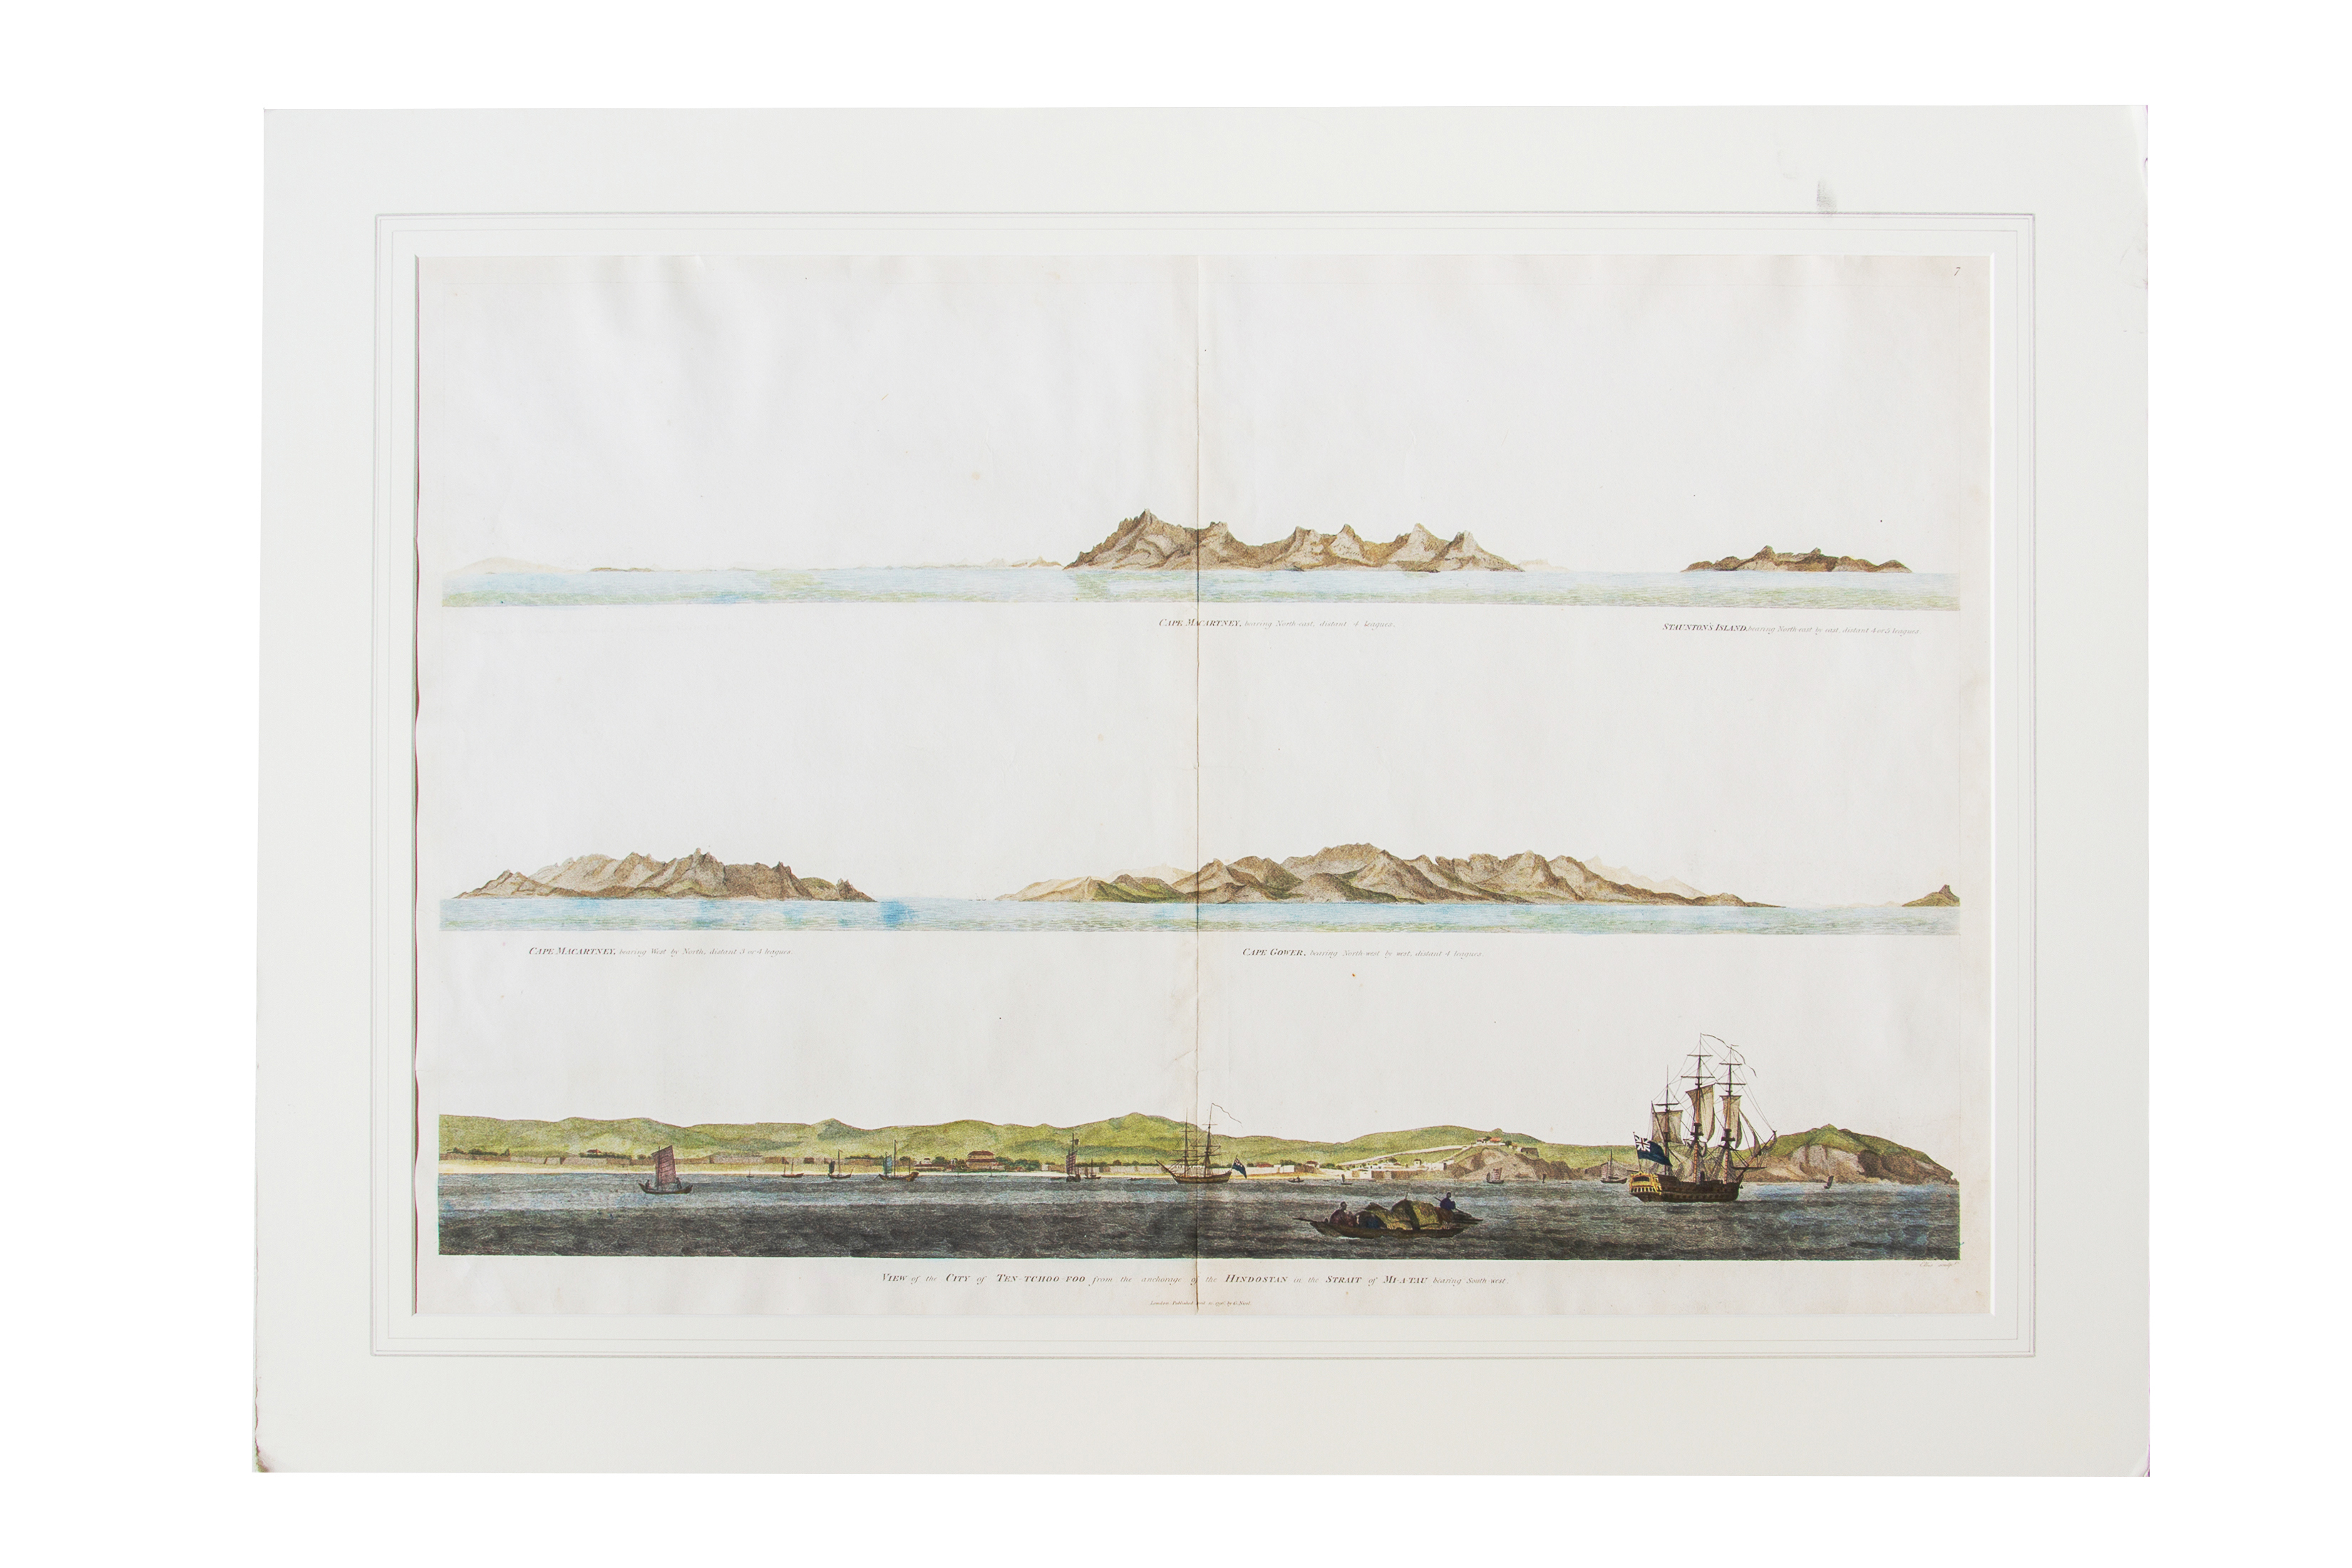 A LARGE HAND COLOURED PANORAMA ENGRAVING OF CHINA